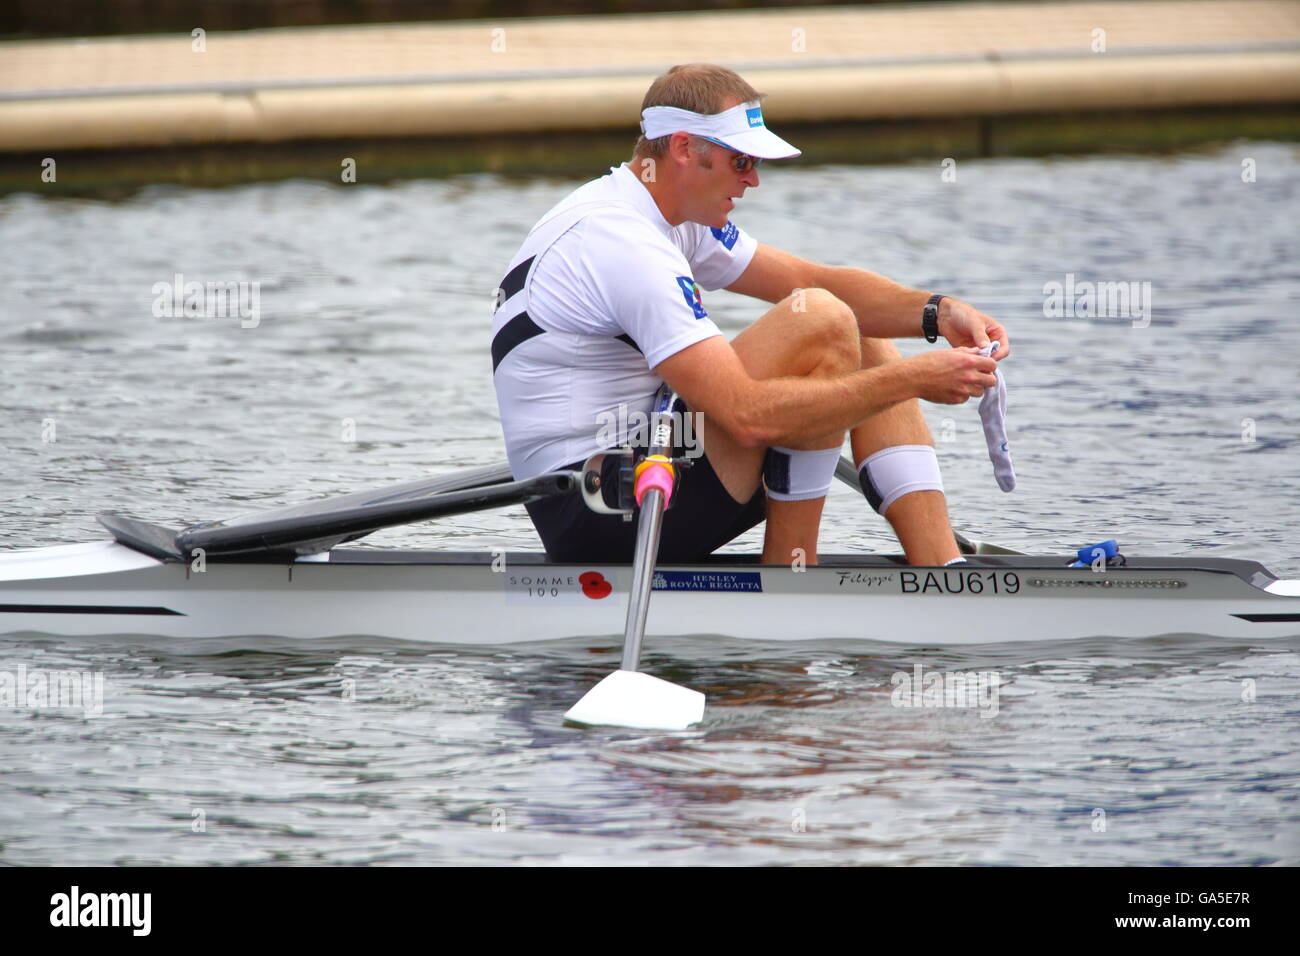 Rowers from all over the world came to the annual Henley Royal Regatta 2016. Drysdale adjusts his socks before the race. Stock Photo